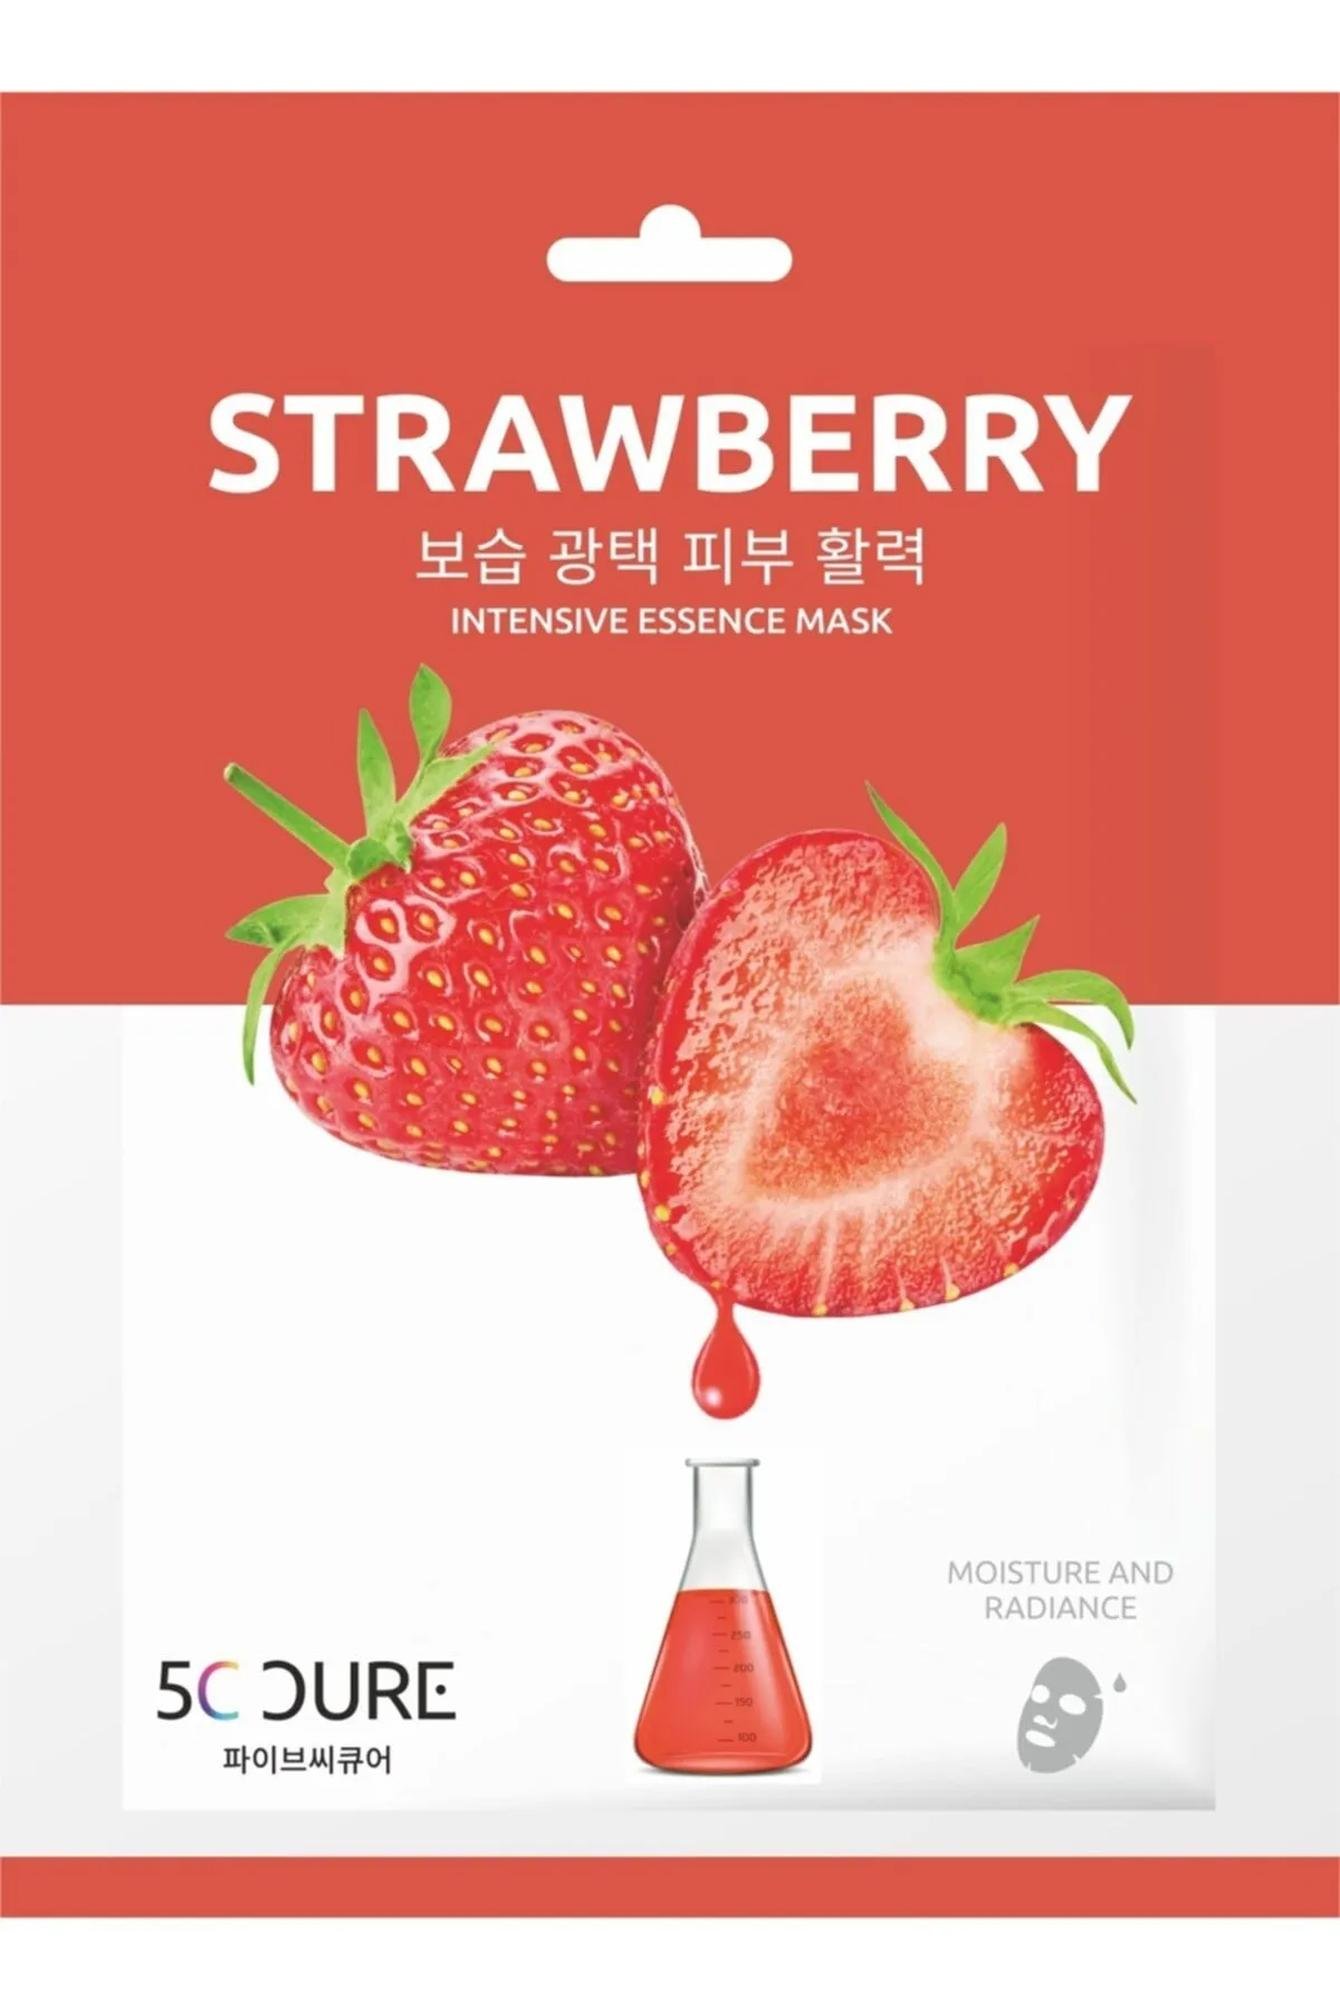  5C Cure Strawberry Intensive Essence Mask